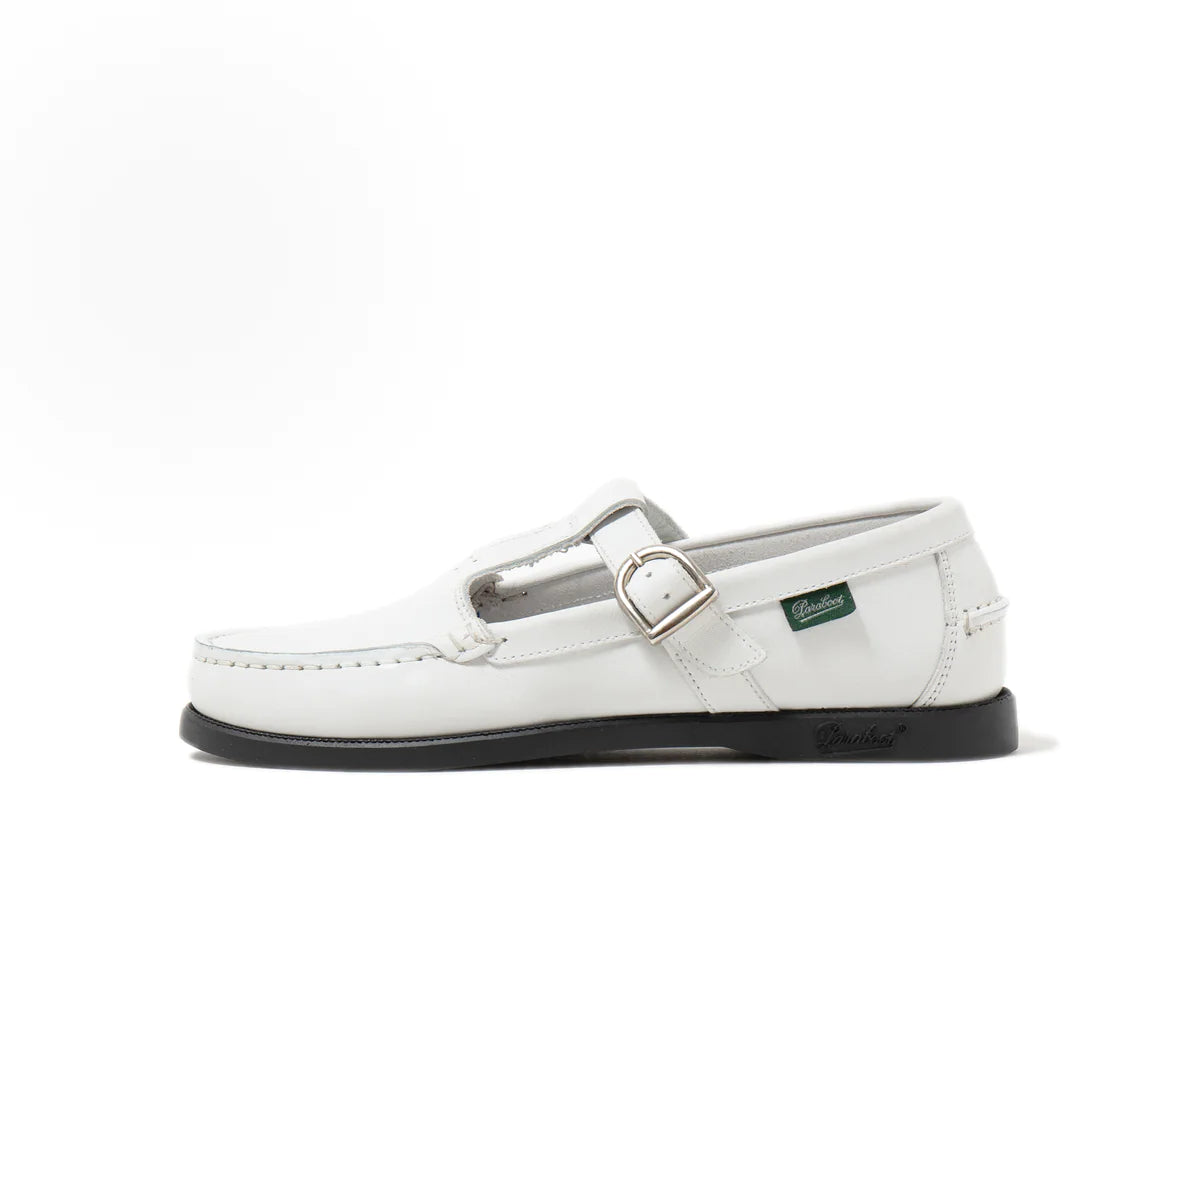 Paraboot Babord F blanc- Genuine rubber sole